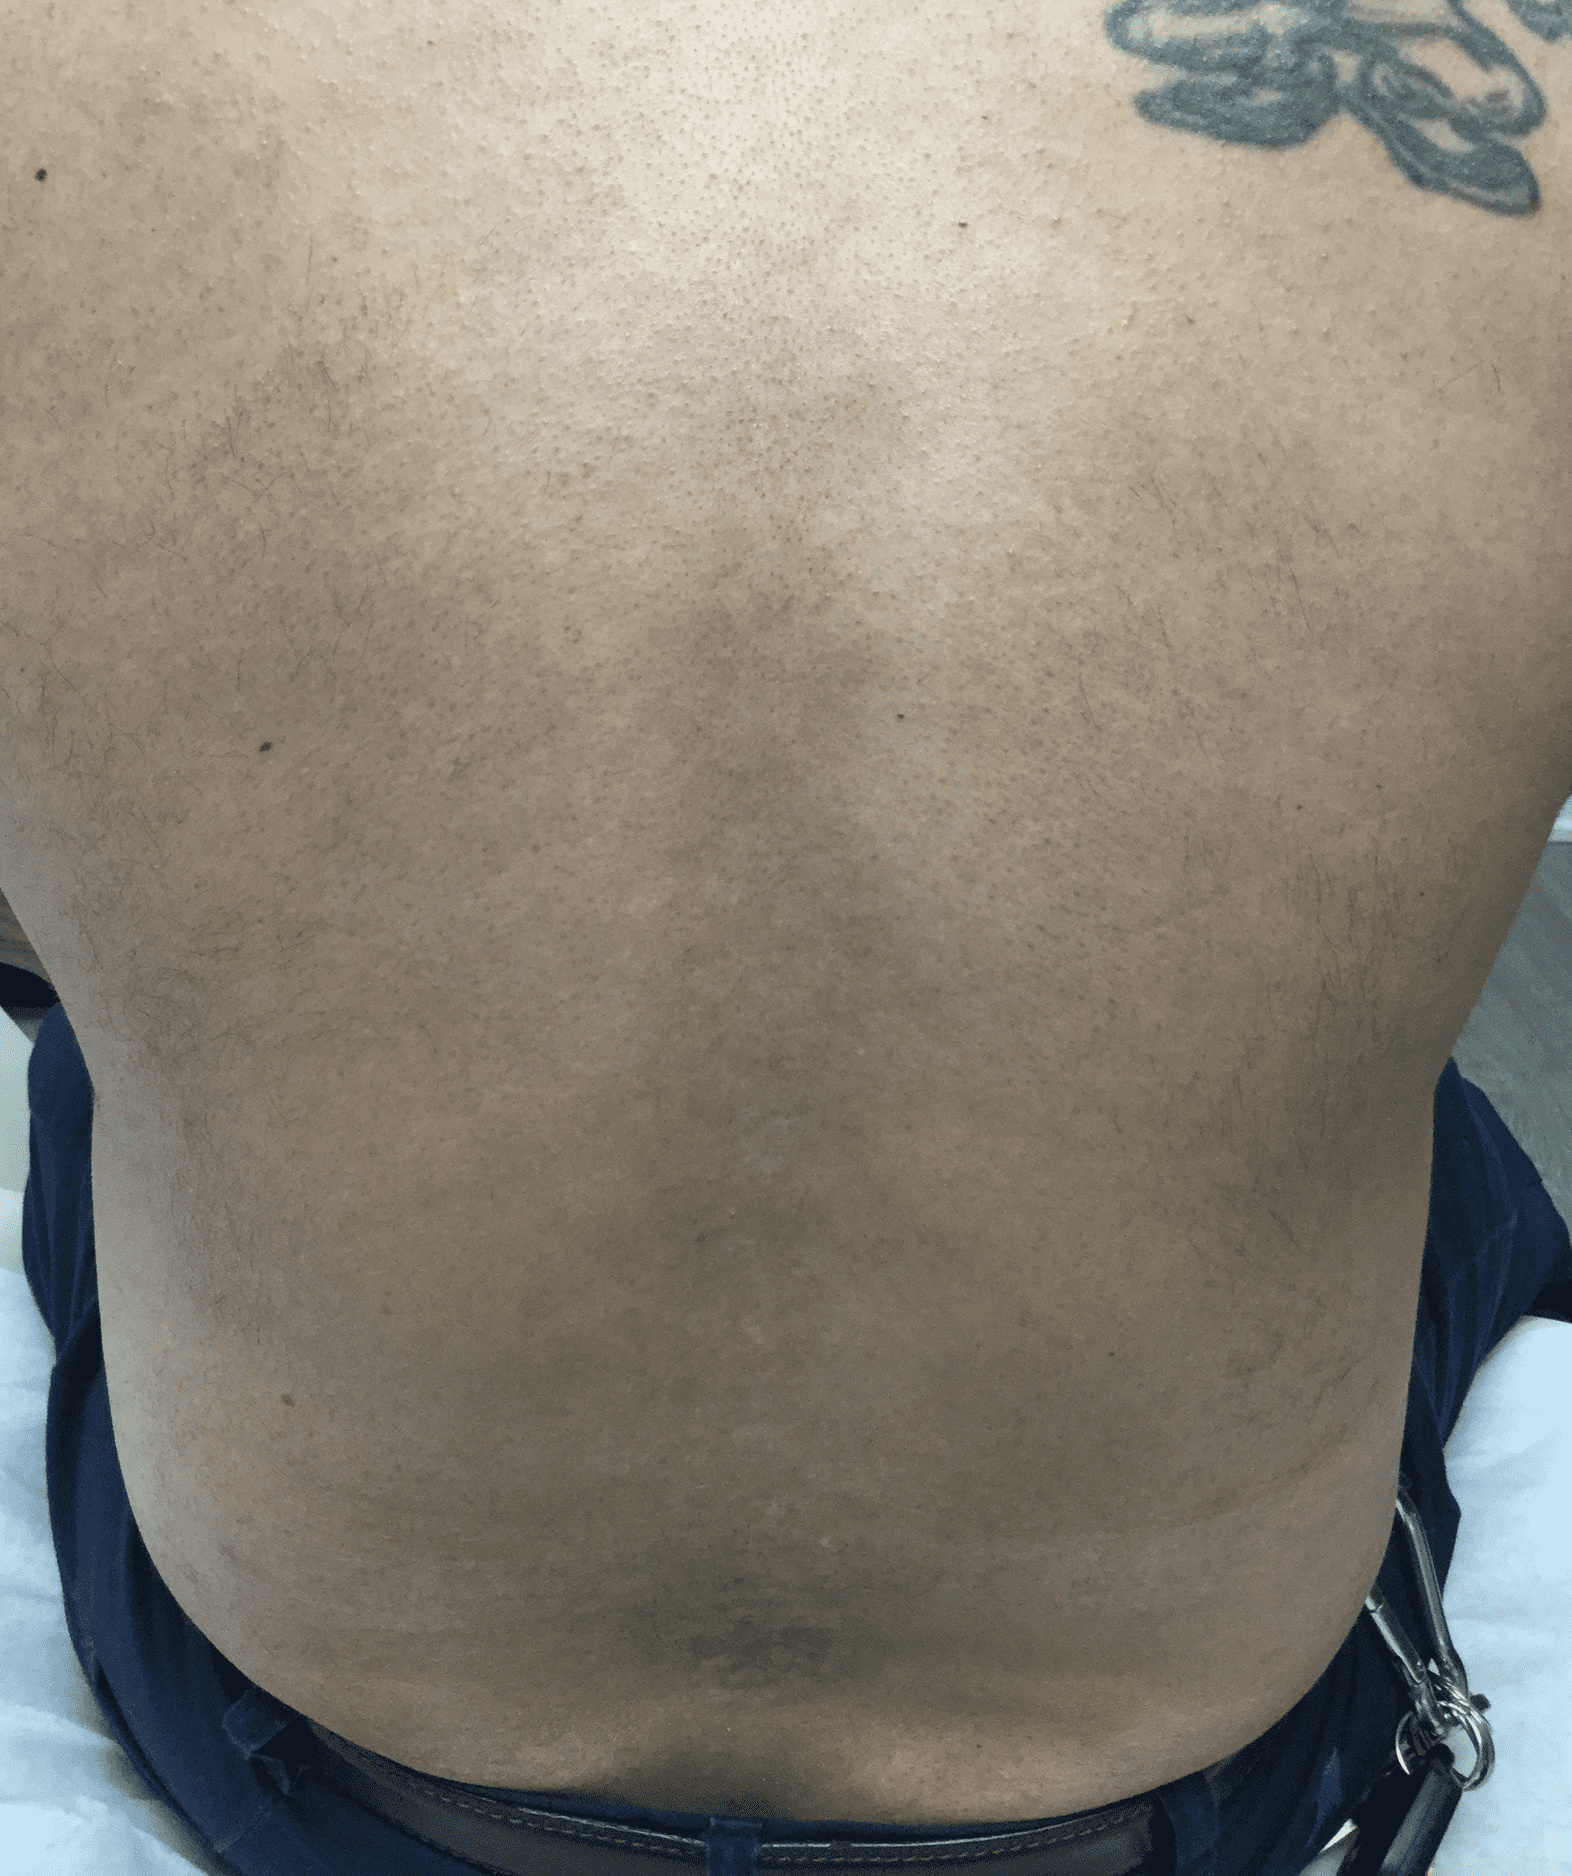 Vol 1: Top 10 Before & After Tattoo Removal Results | Removery